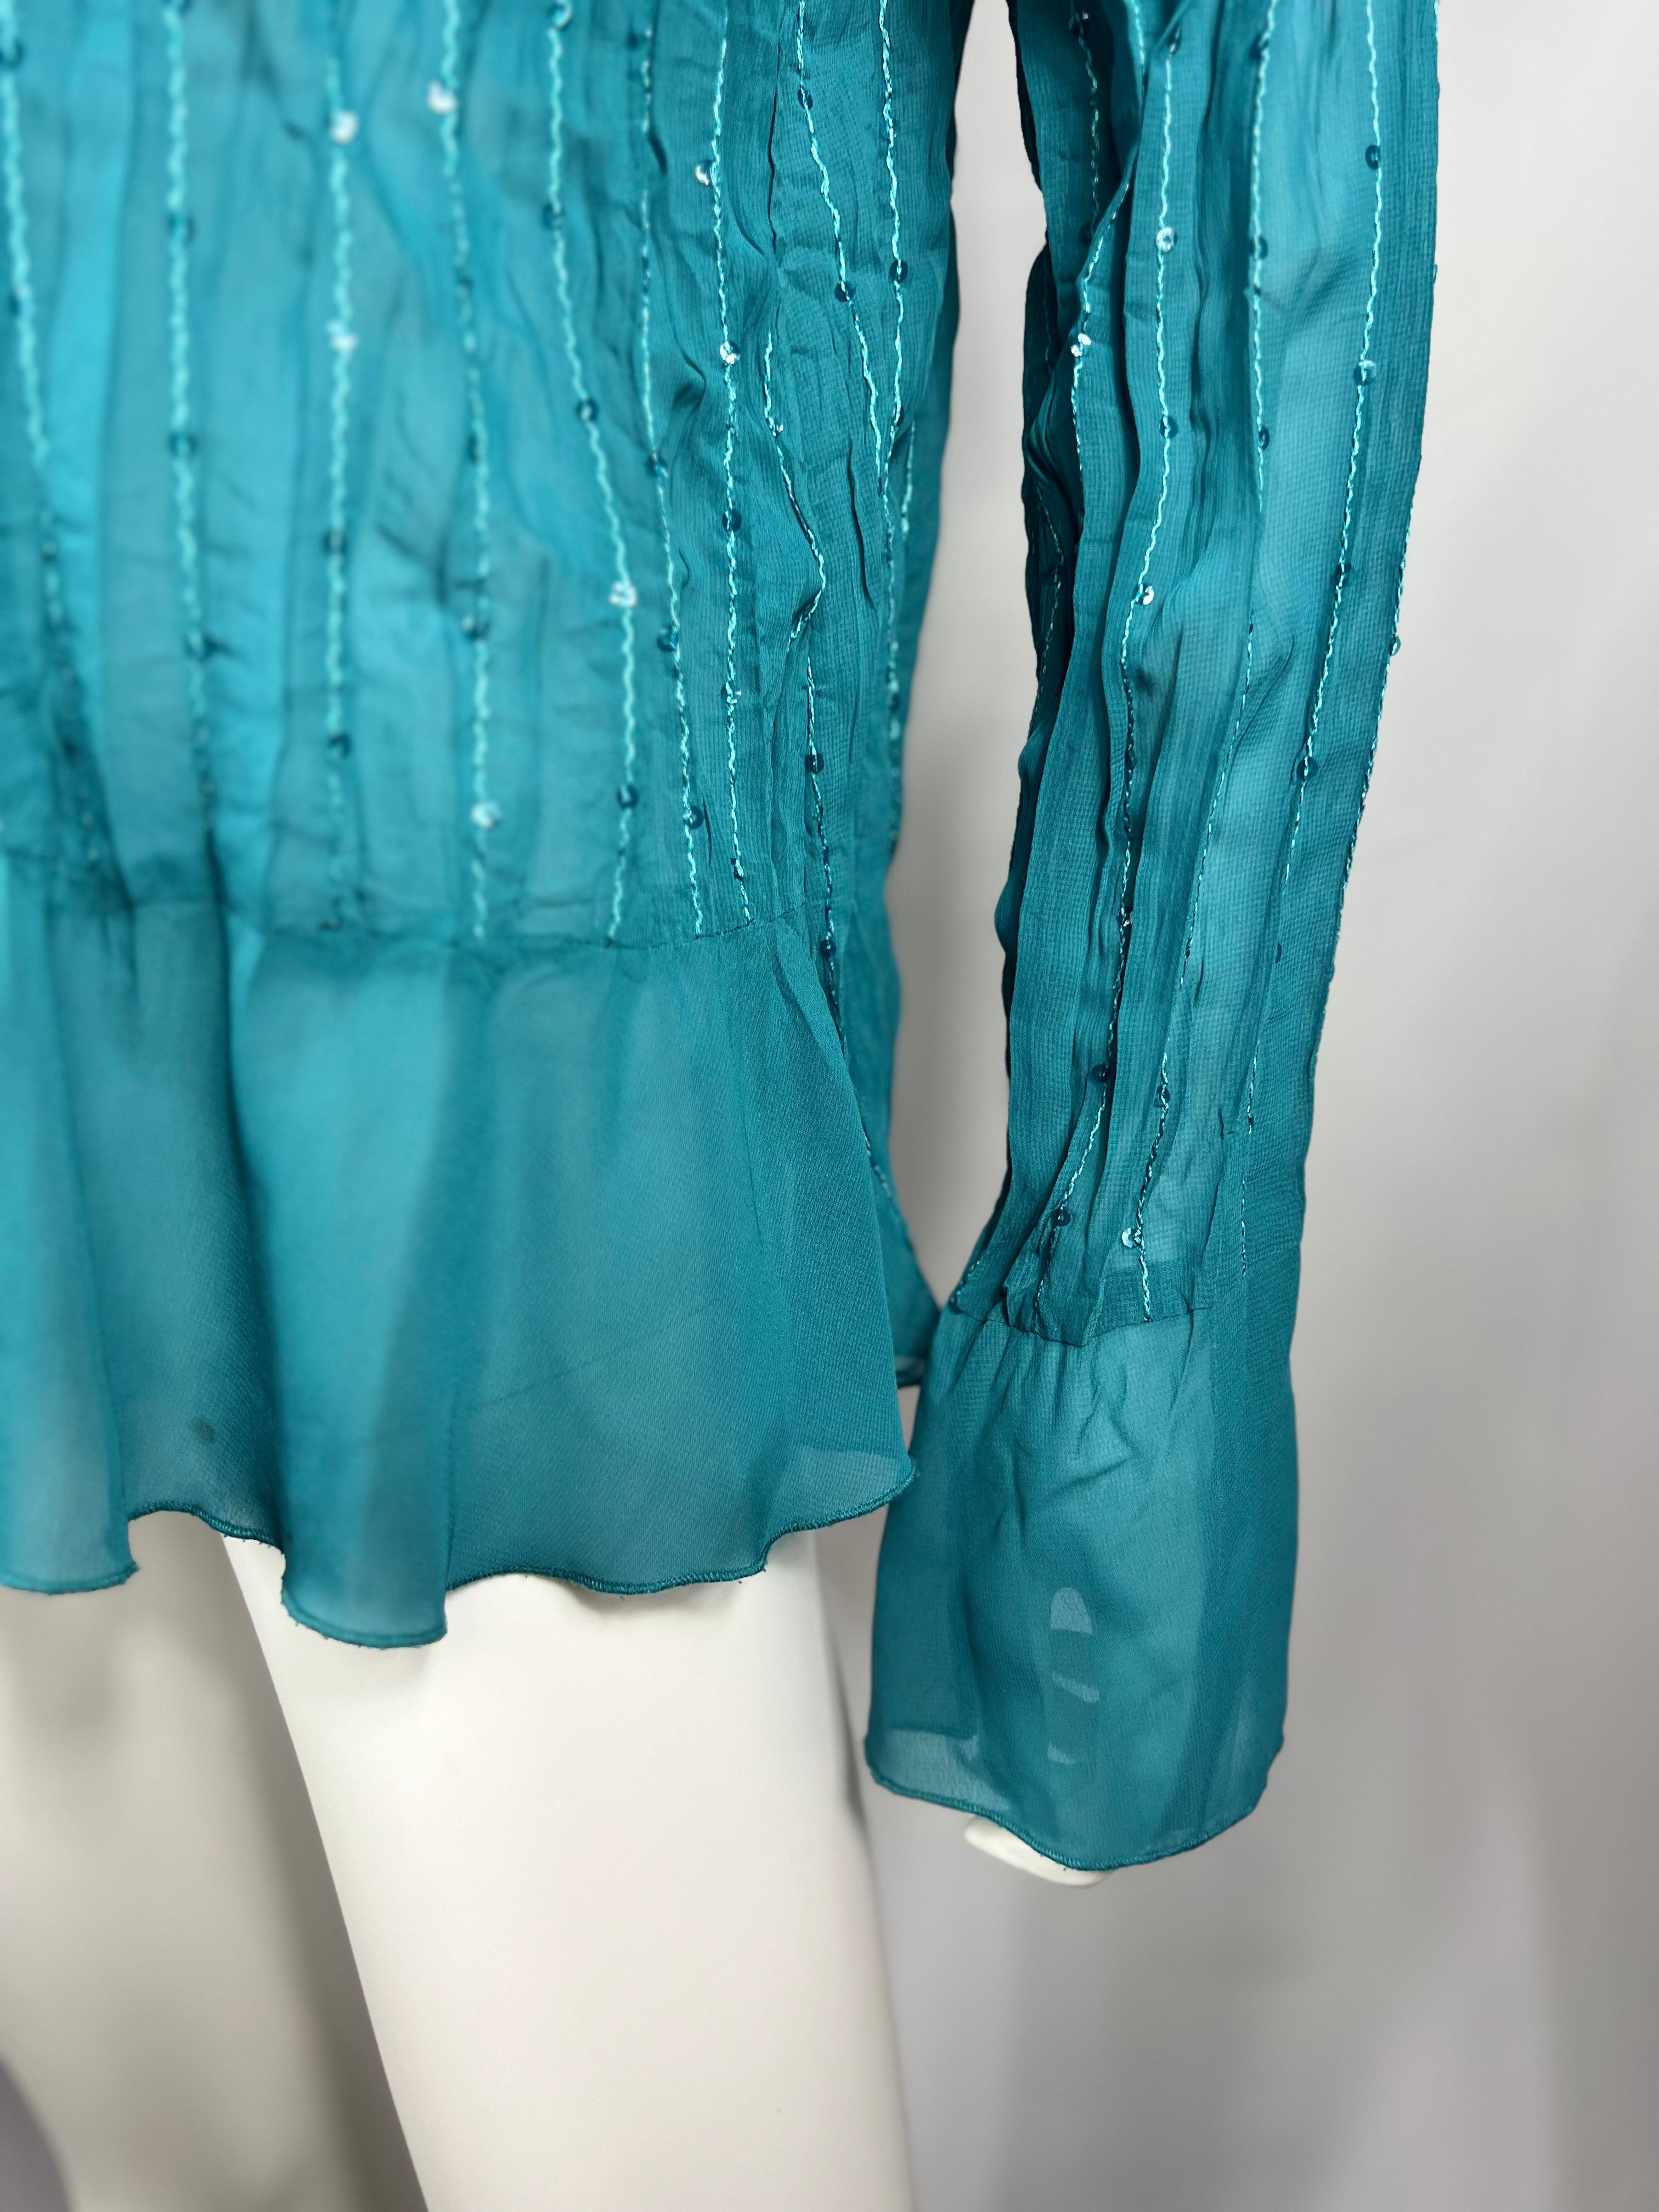 Y2K Teal Ruffle Sequin Blouse